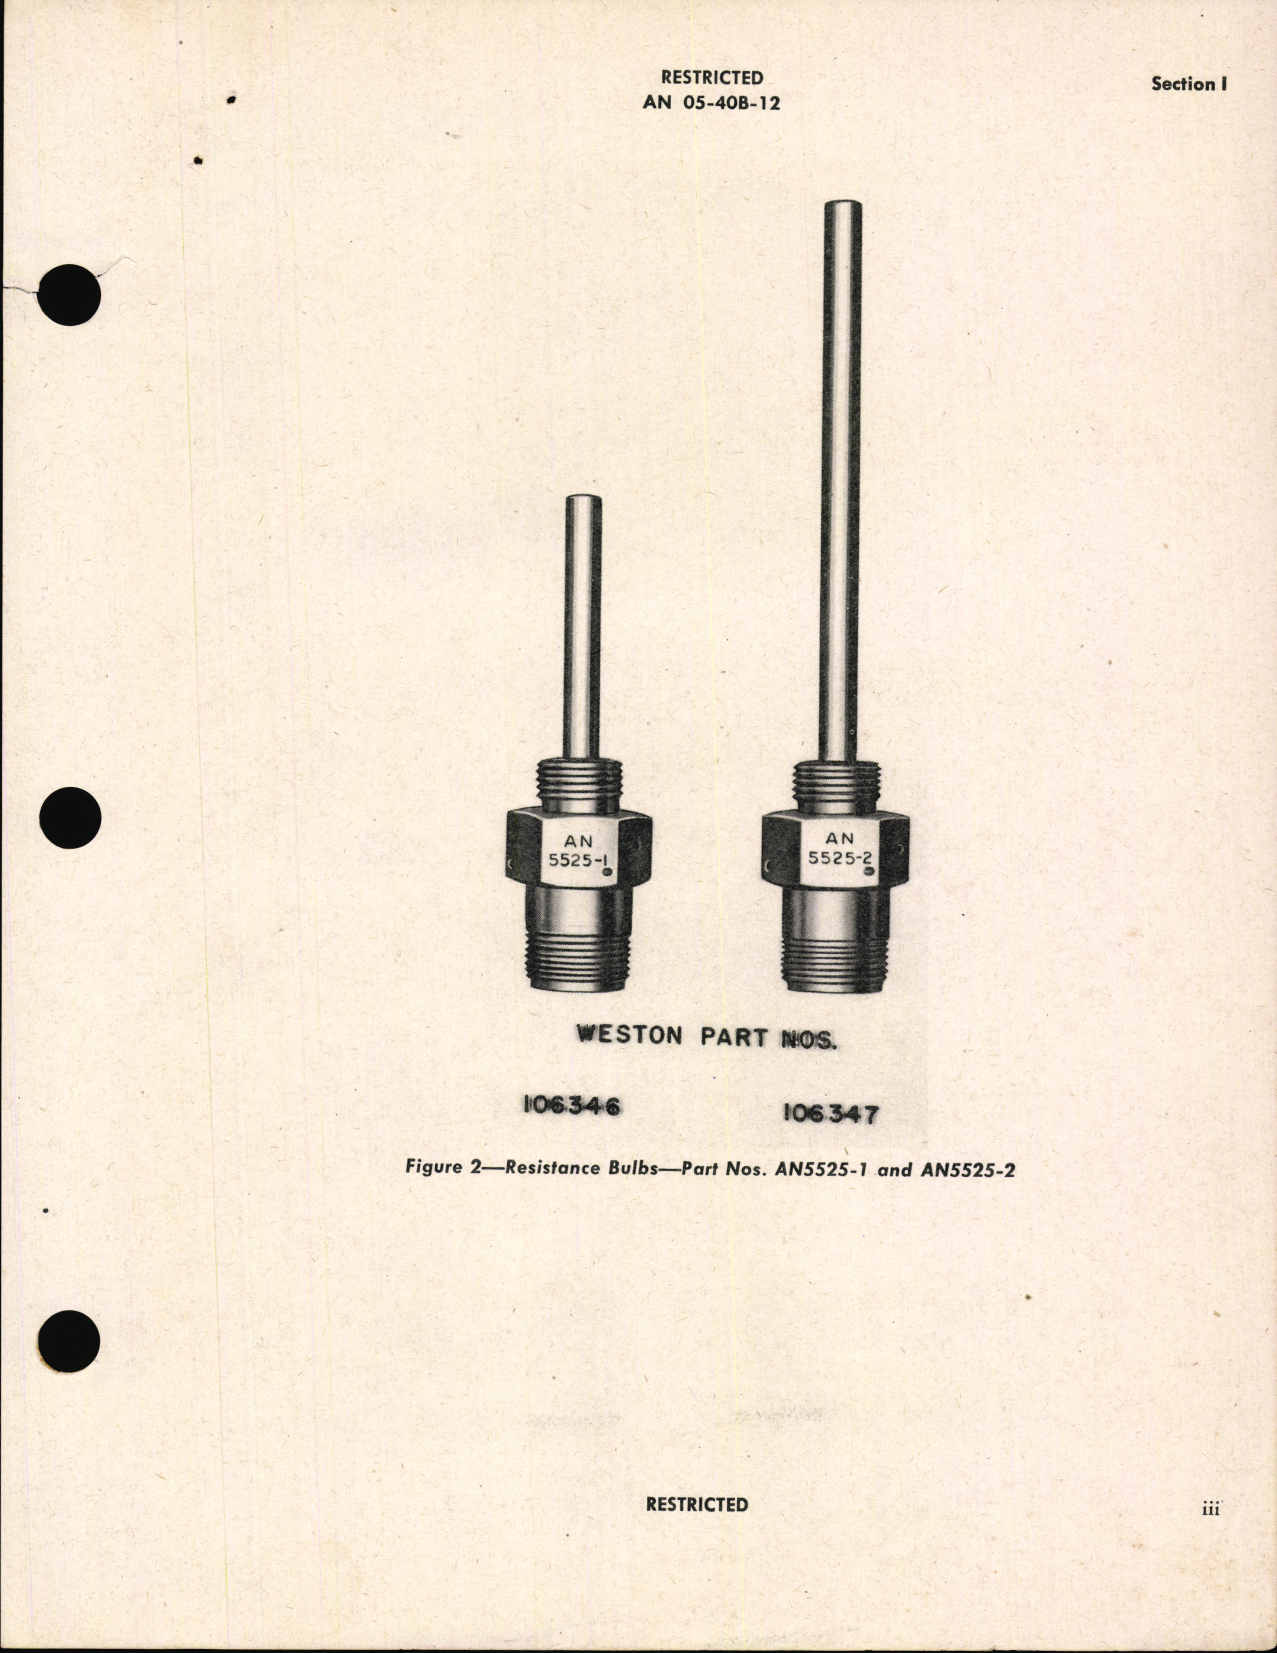 Sample page 5 from AirCorps Library document: Handbook of Instructions with Parts Catalog for Thermometer Indicators